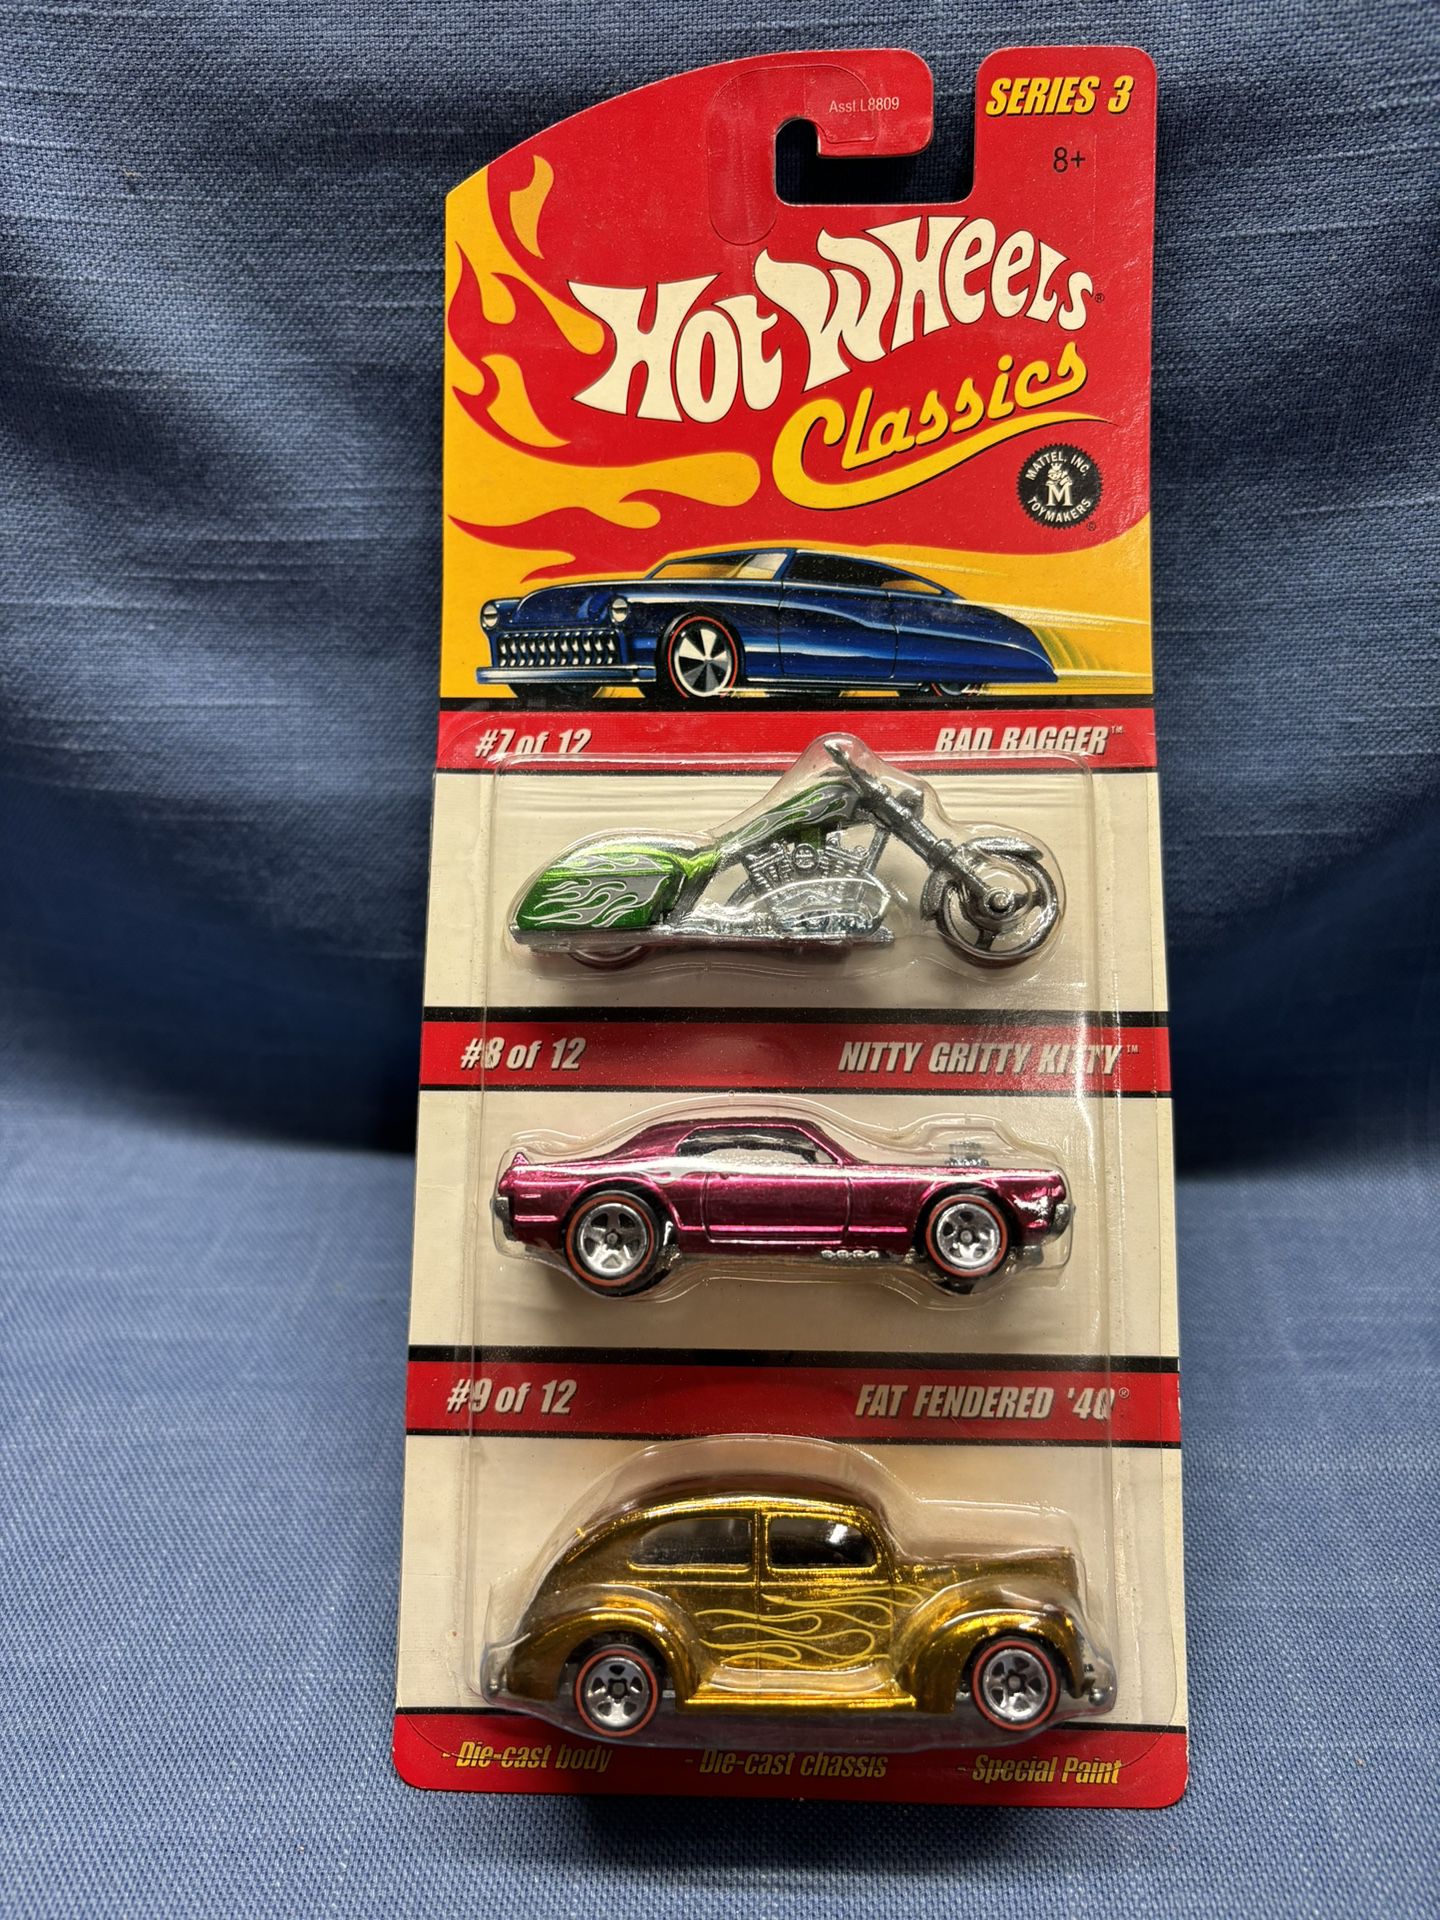 Hot Wheels “Classics” (2007) 3-Pack - New in Blister Pack! 